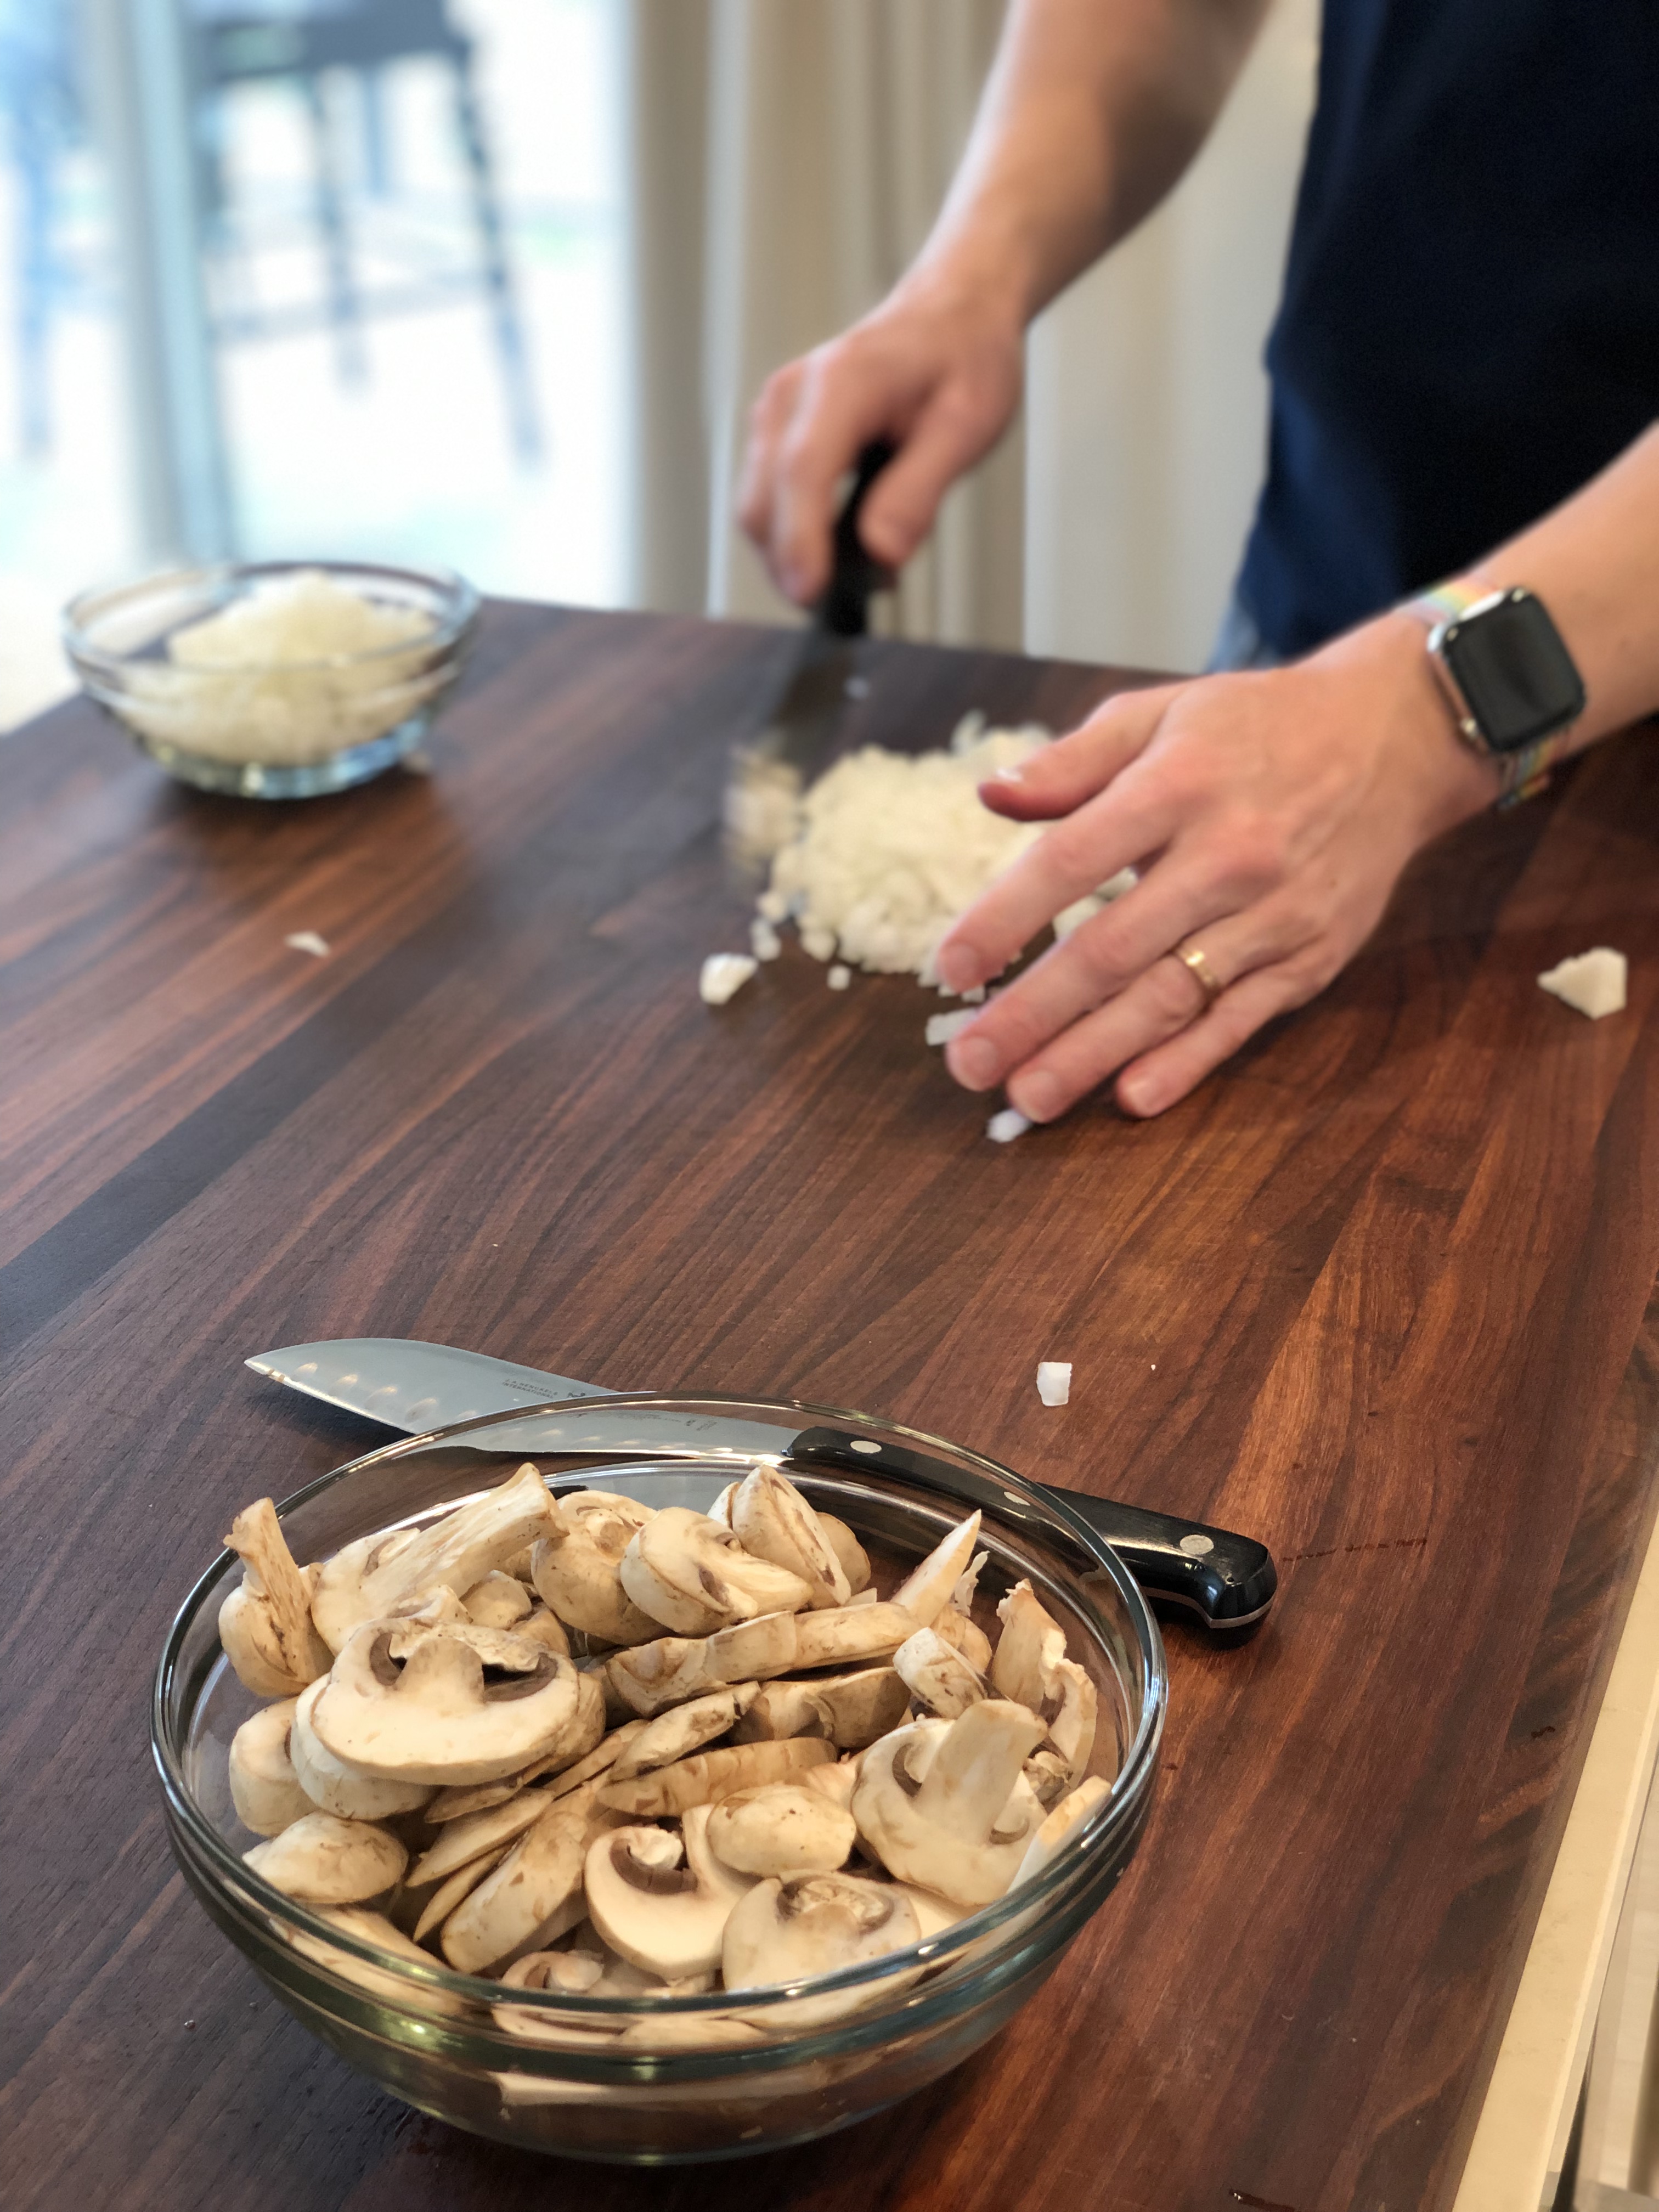 Cutting the Mushrooms and Onions for Beef Stroganoff